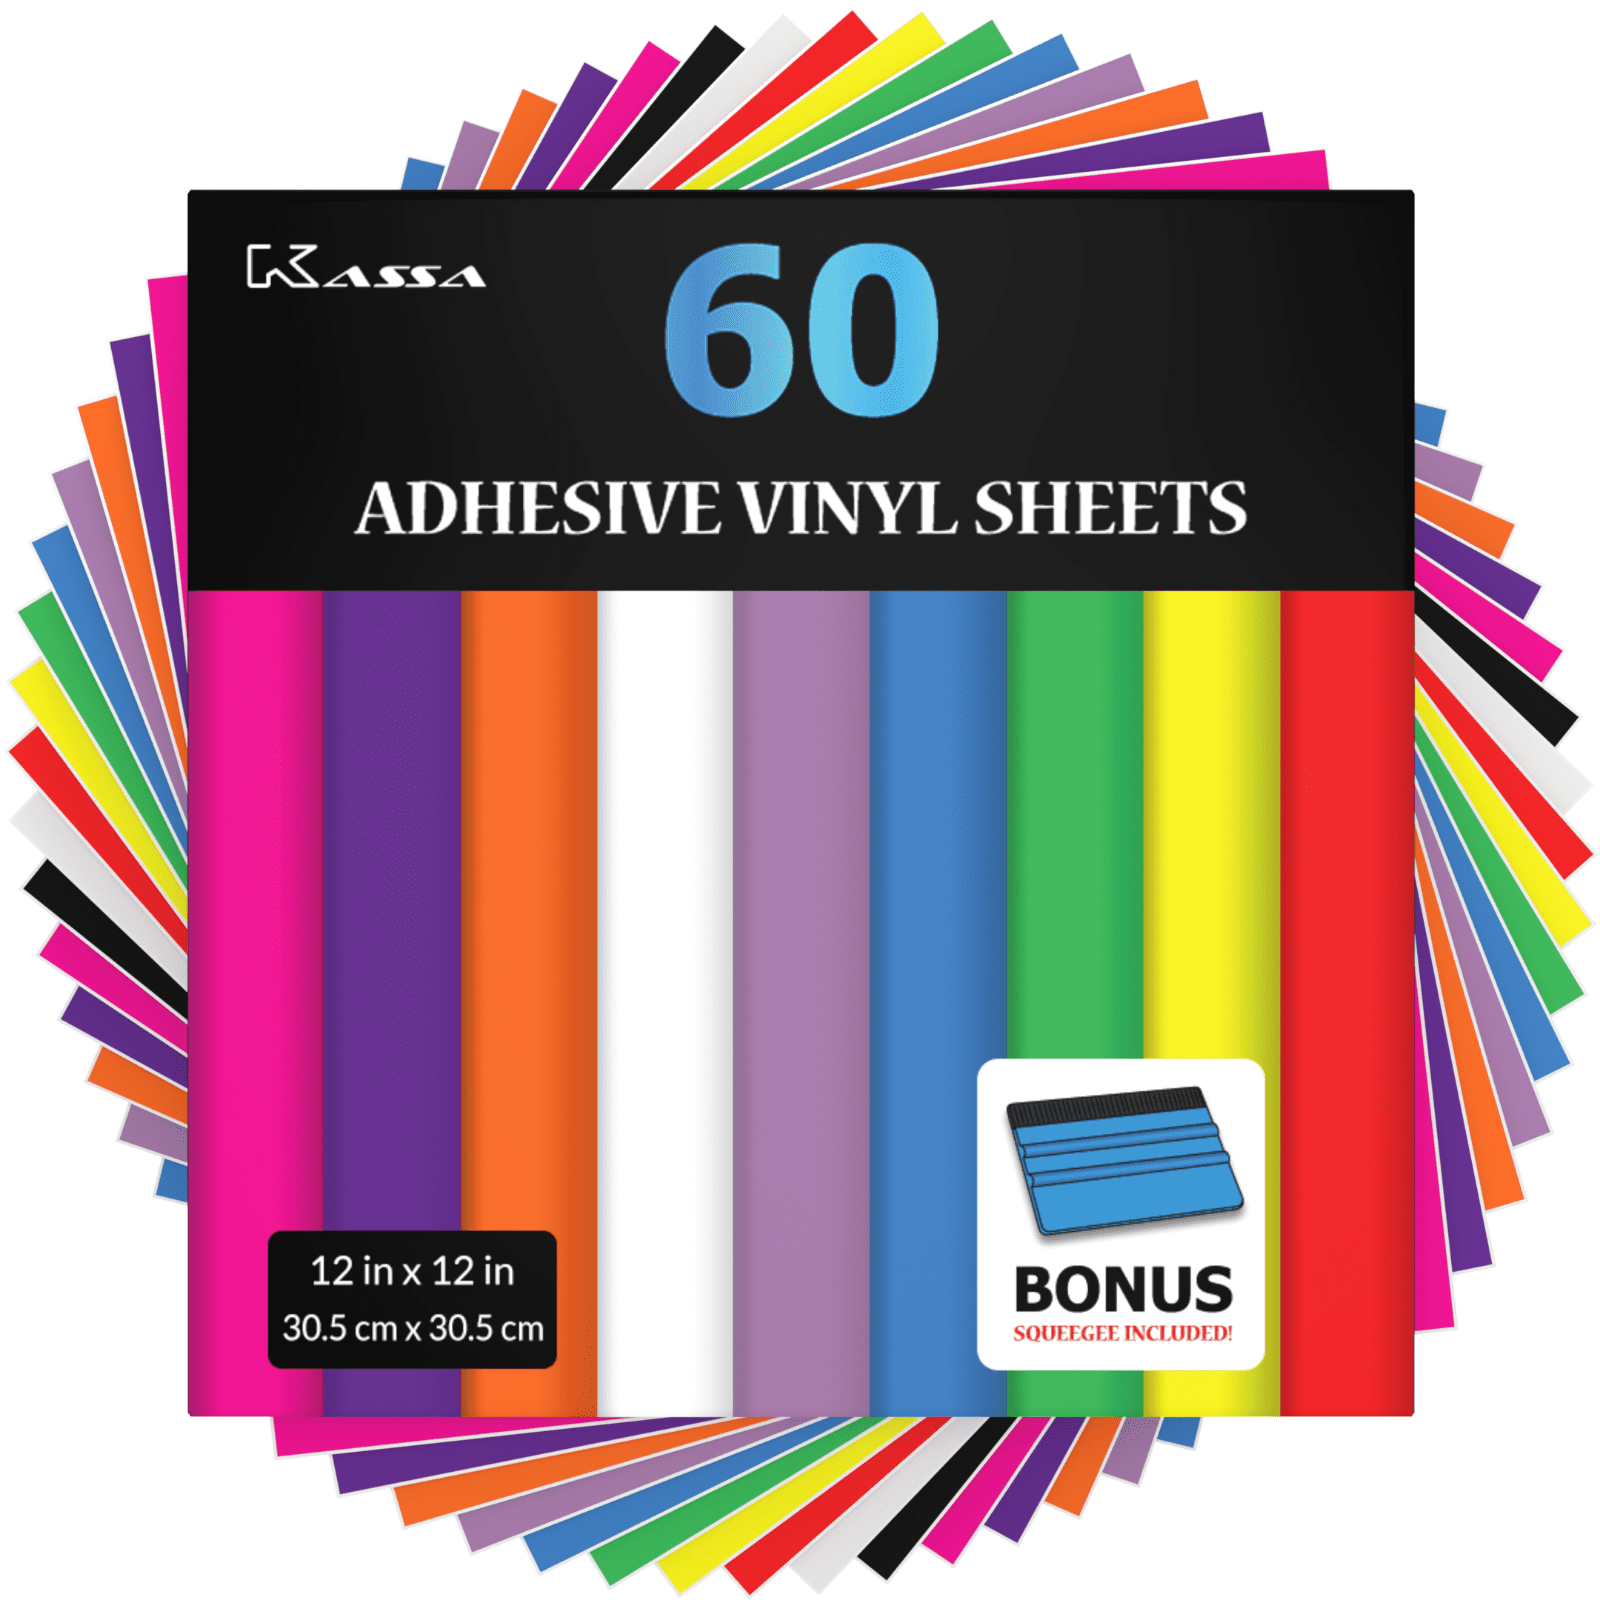 Quefe QUEFE 40 Packs Permanent Adhesive Vinyl Sheets for Cricut, 12in x  12in, 38 Assorted Colors for Cutting Machine, Signs, Scrapbook